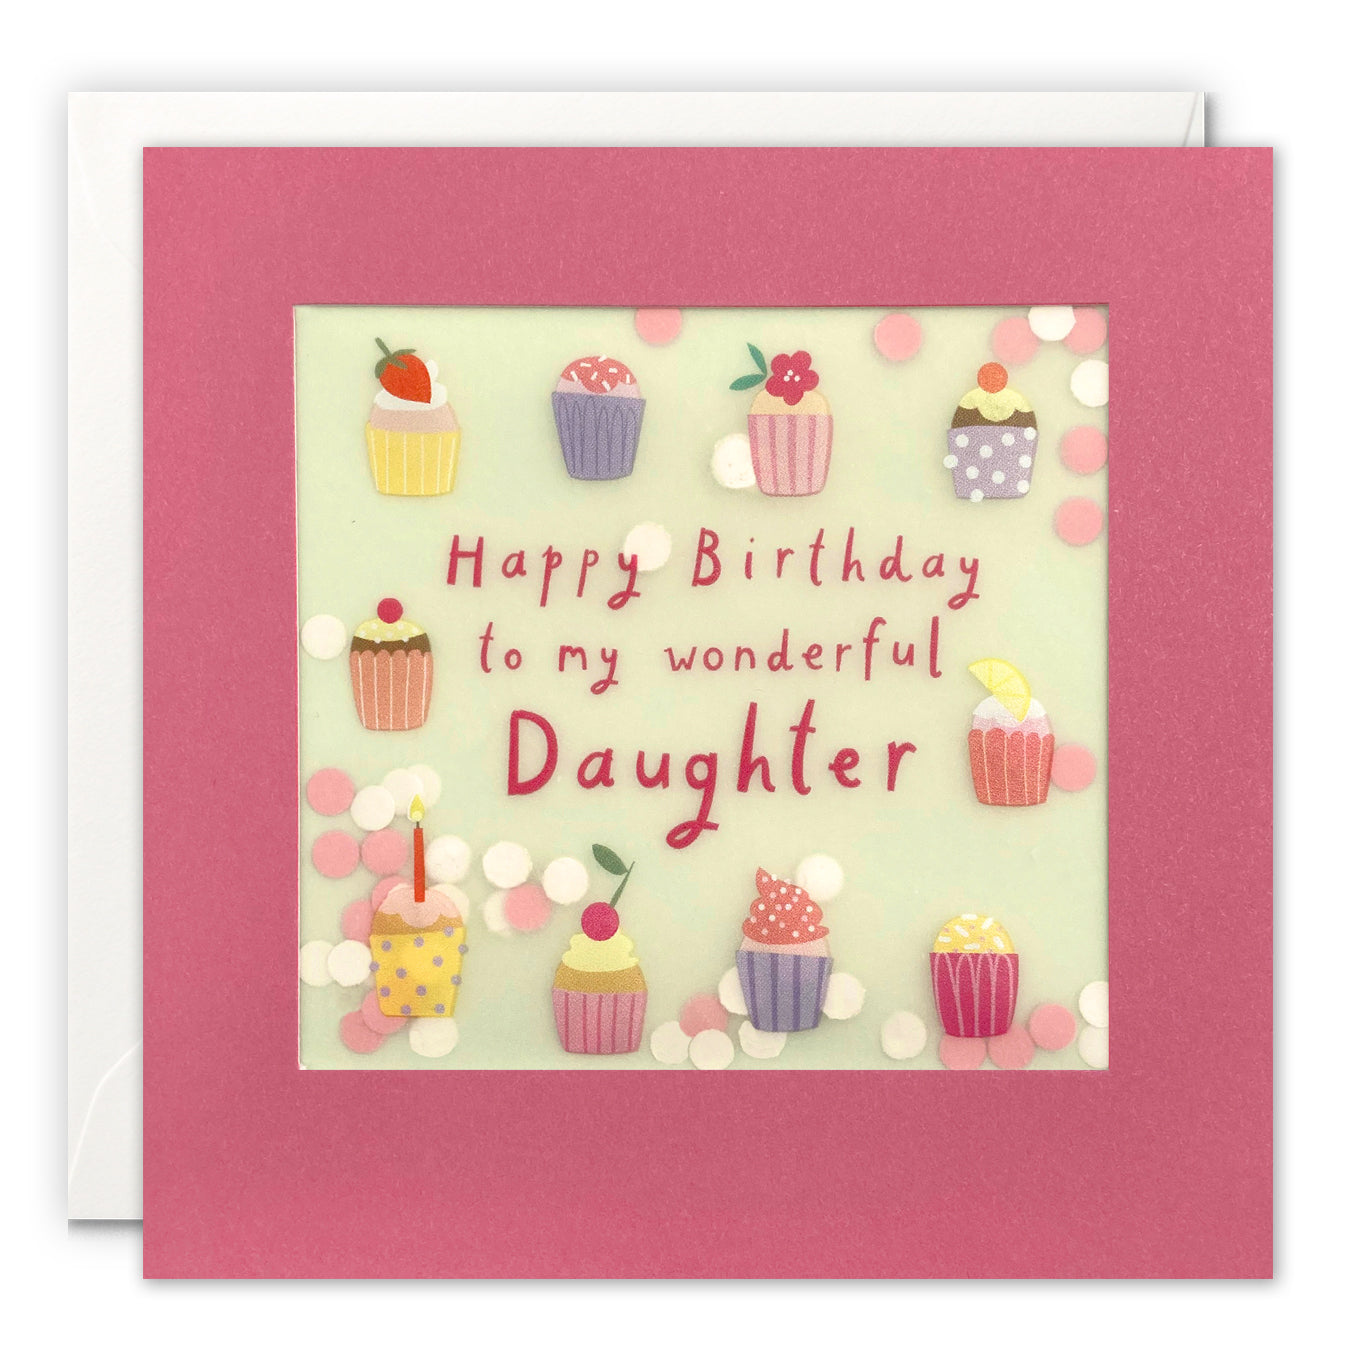 Daughter Cupcakes Shakies Birthday Card from Penny Black